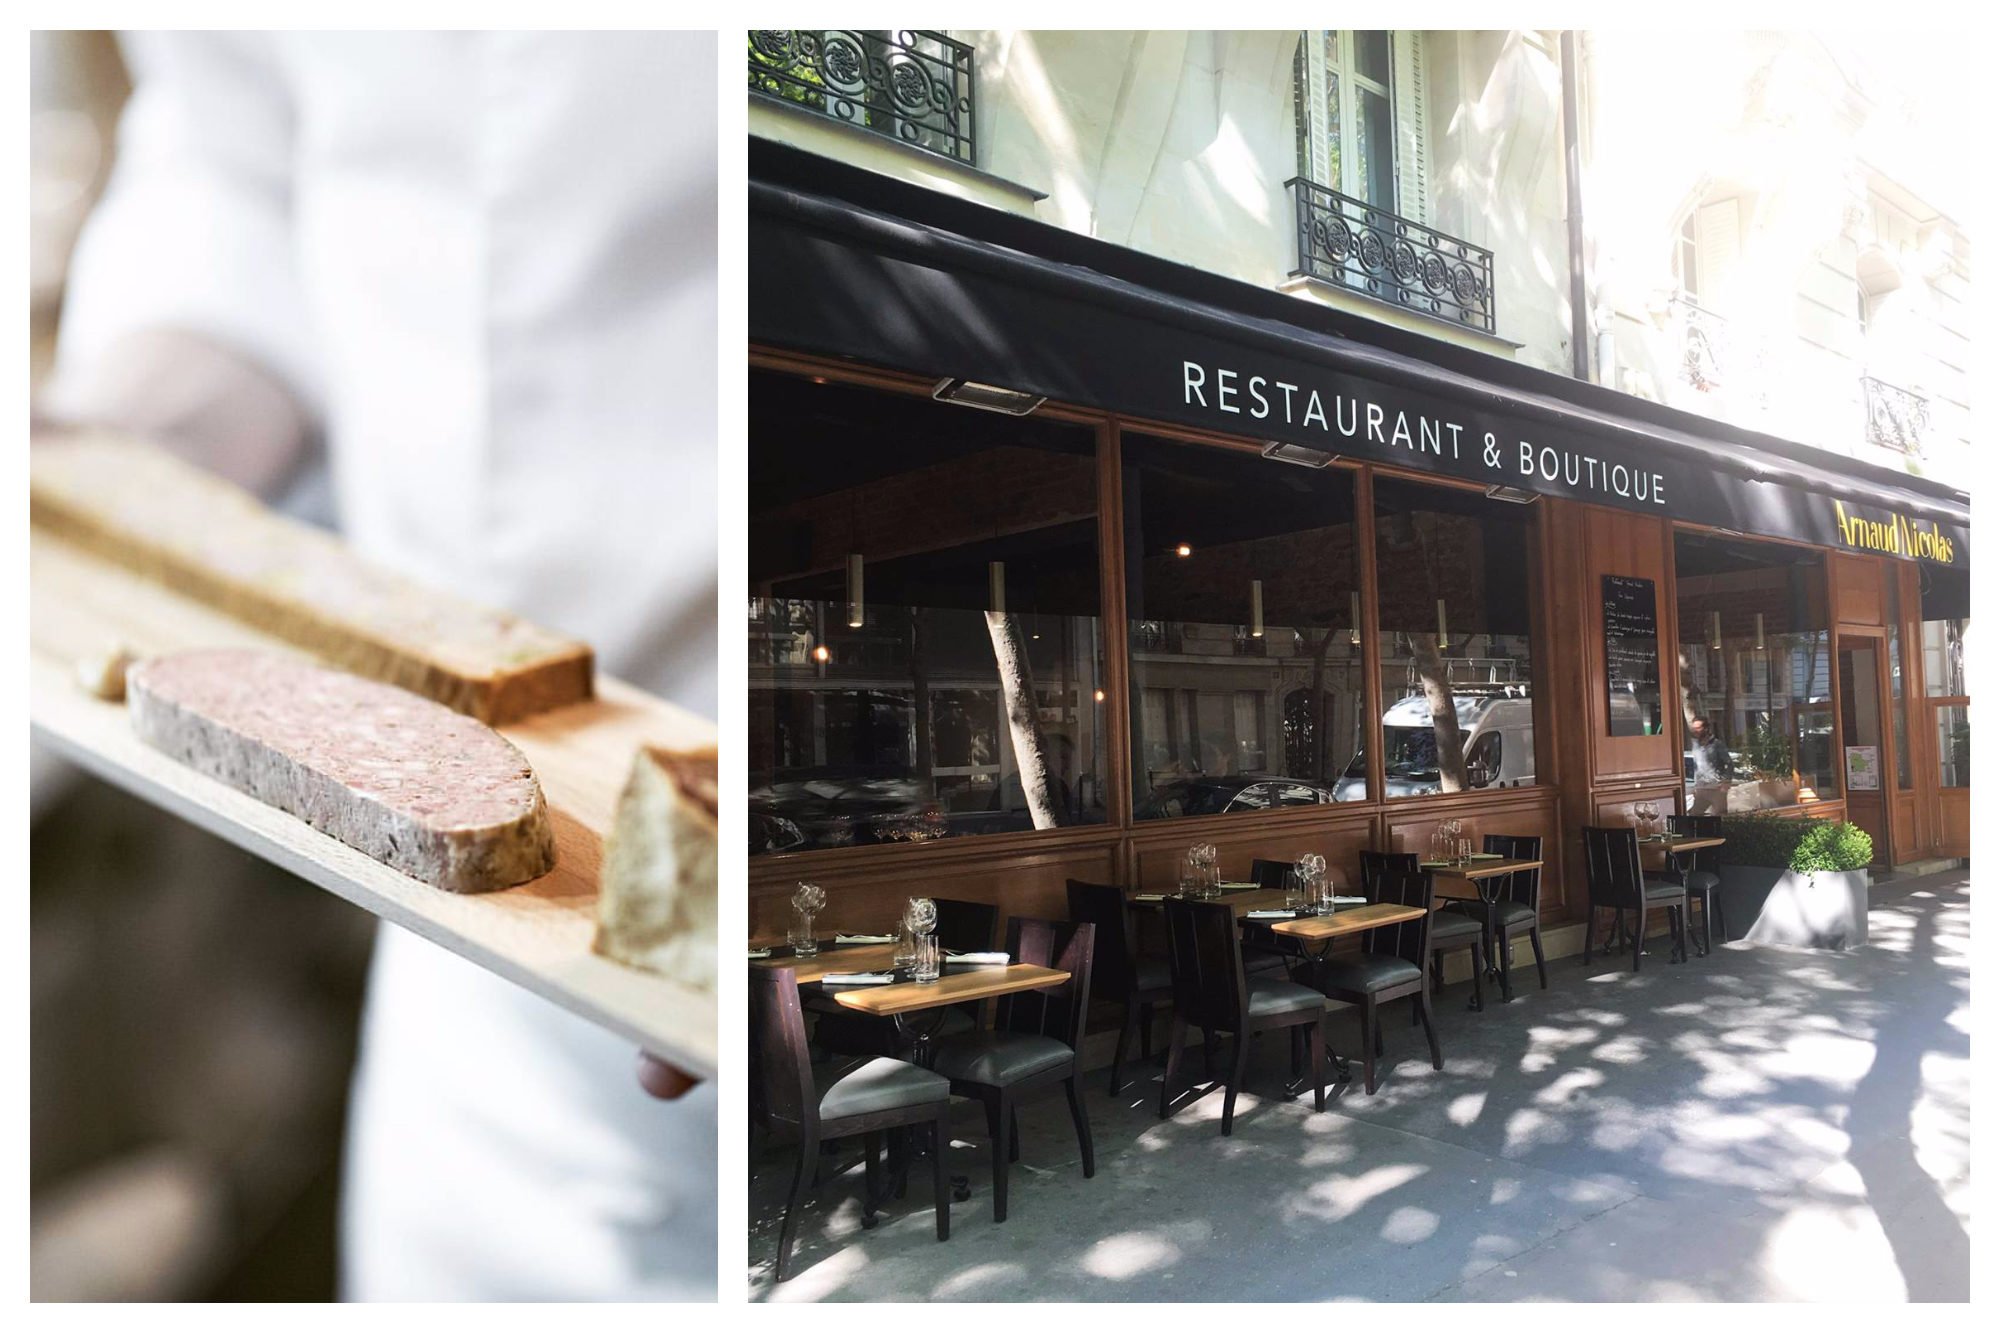 A slab of homemade terrine (left) and the outdoor terrace seating in the sunshine (right) at Arnaud Nicolas' restaurant near the Eiffel Tower in Paris.